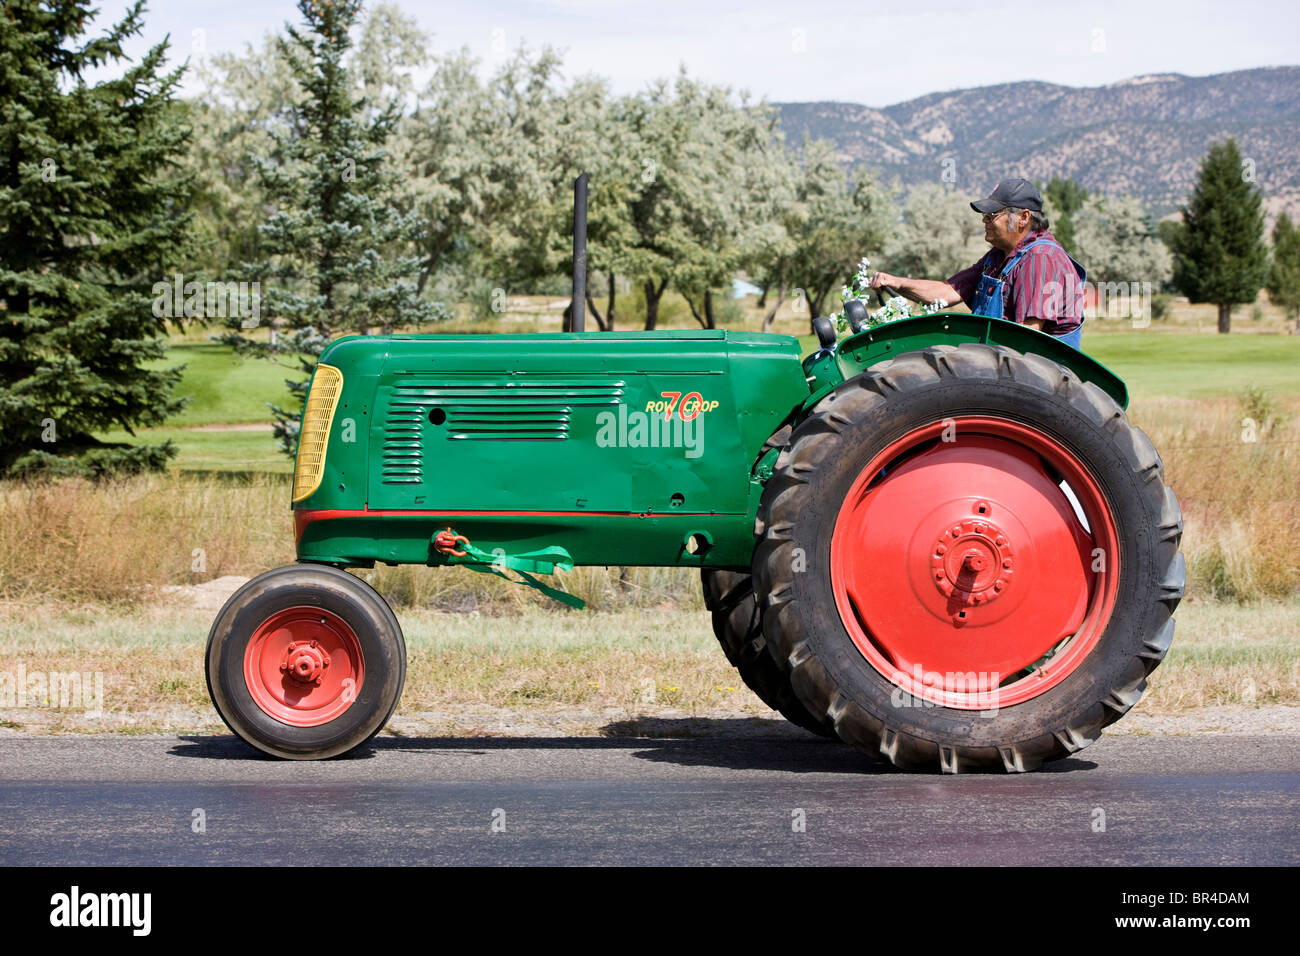 Wedding procession, rancher riding on antique tractor from the church to the reception, Salida, Colorado, USA Stock Photo